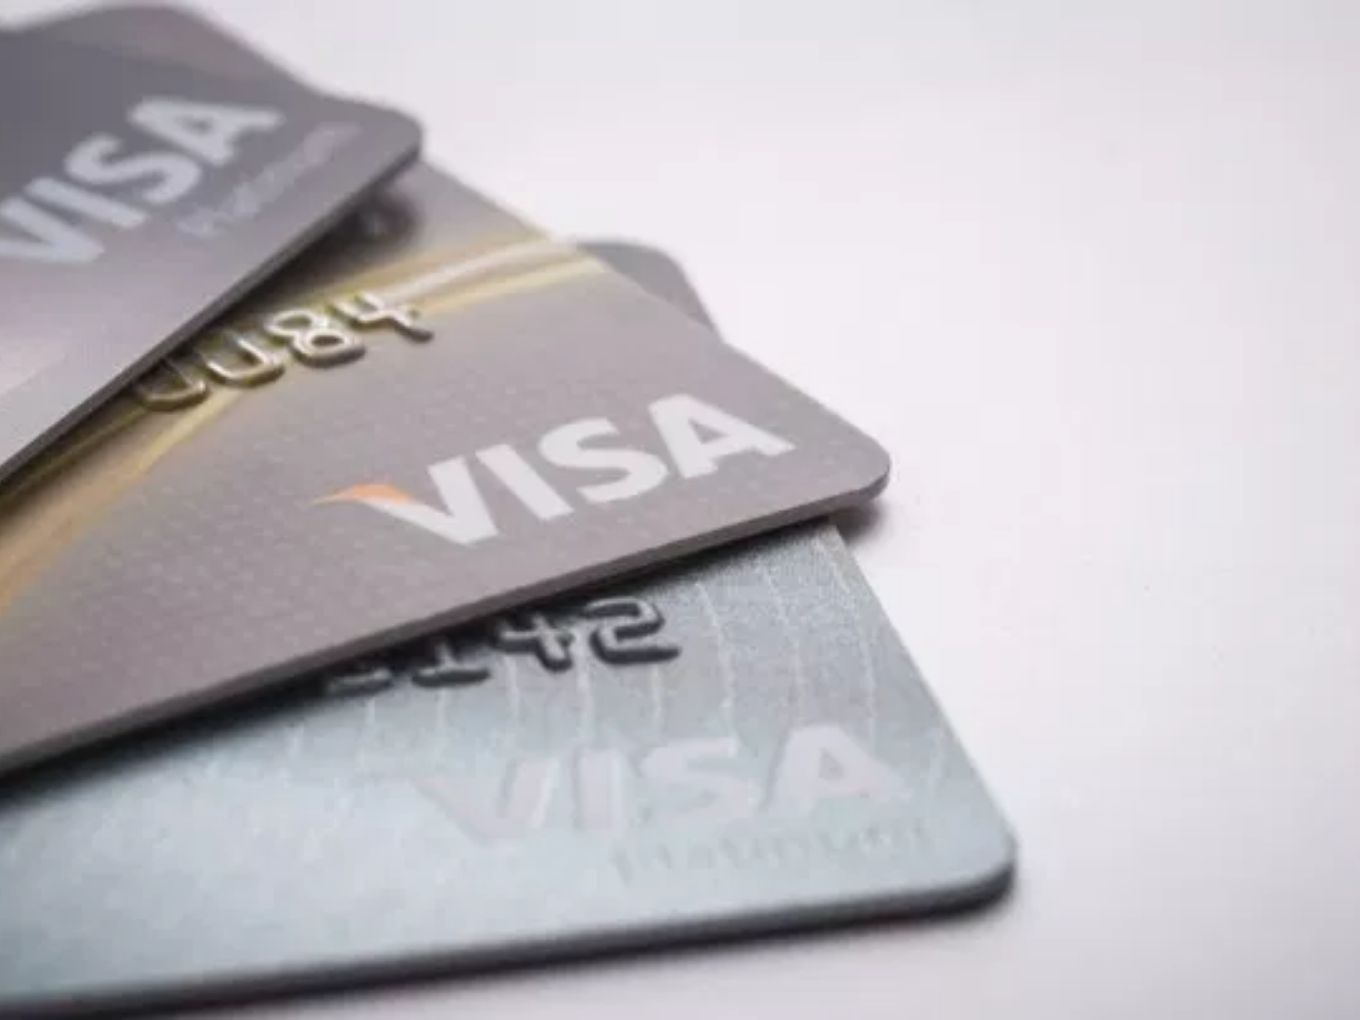 Visa Ready To Adhere To India’s Data Localisation Norms